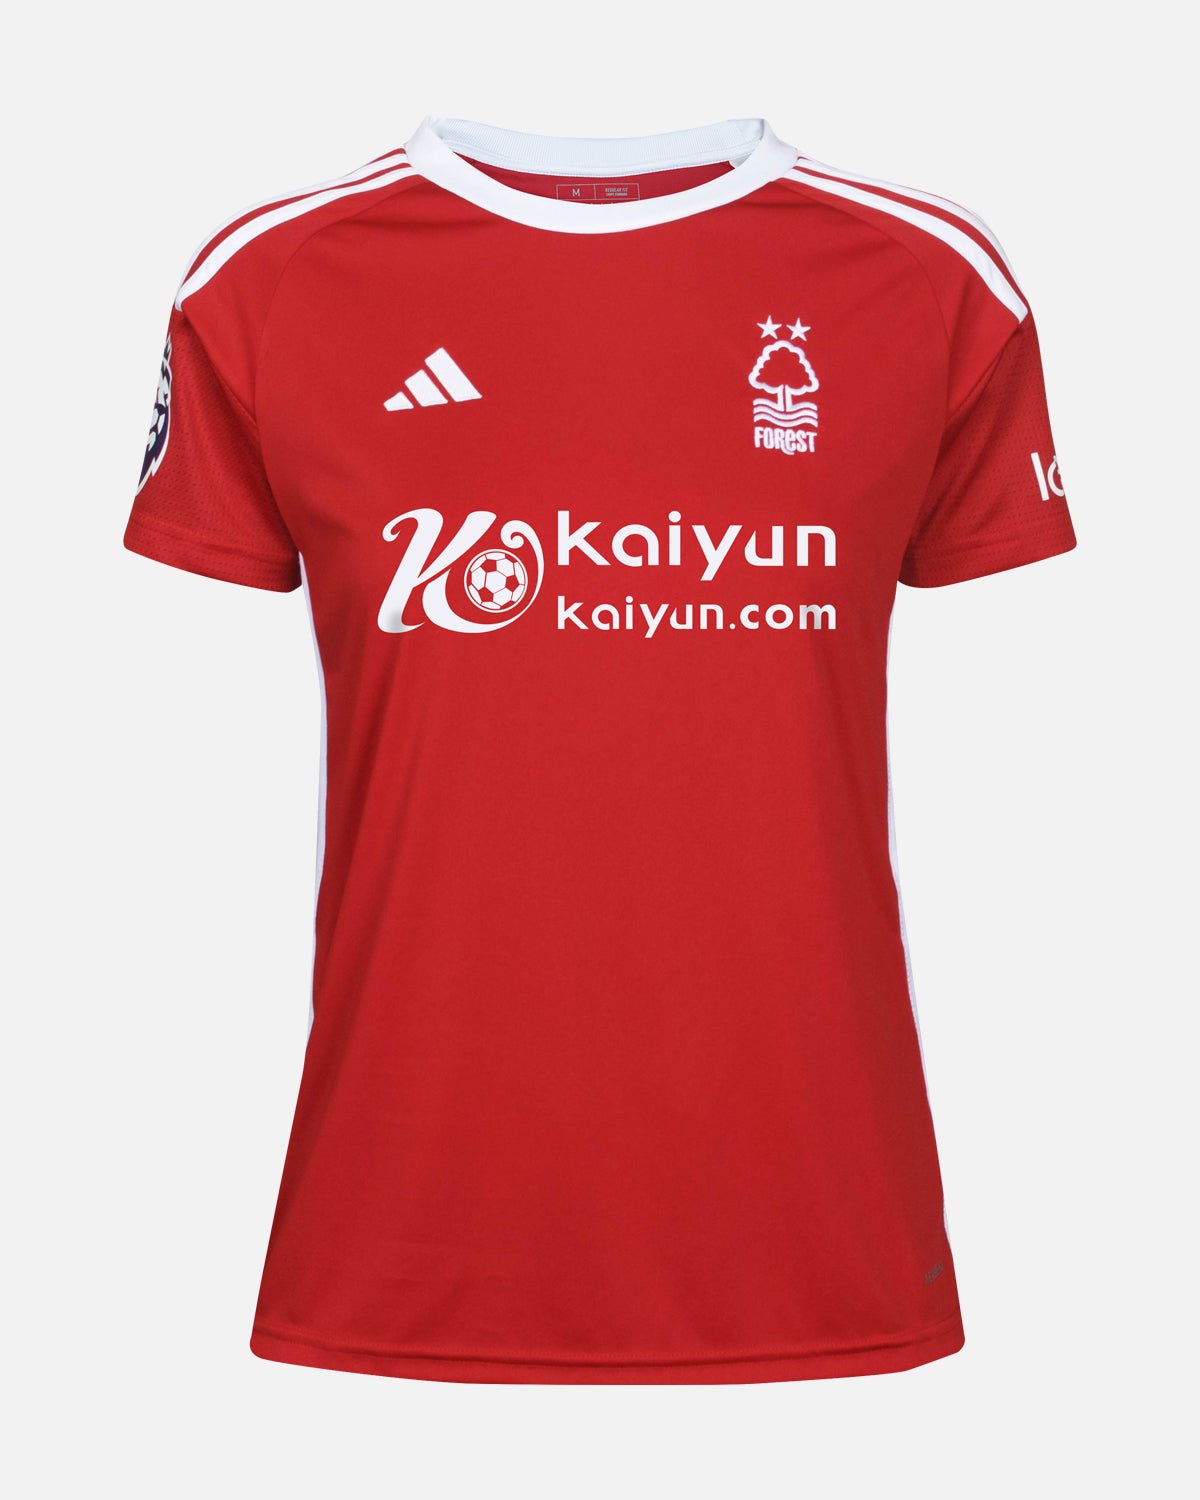 NFFC Women's Home Shirt 23-24 - Boly 30 - Nottingham Forest FC